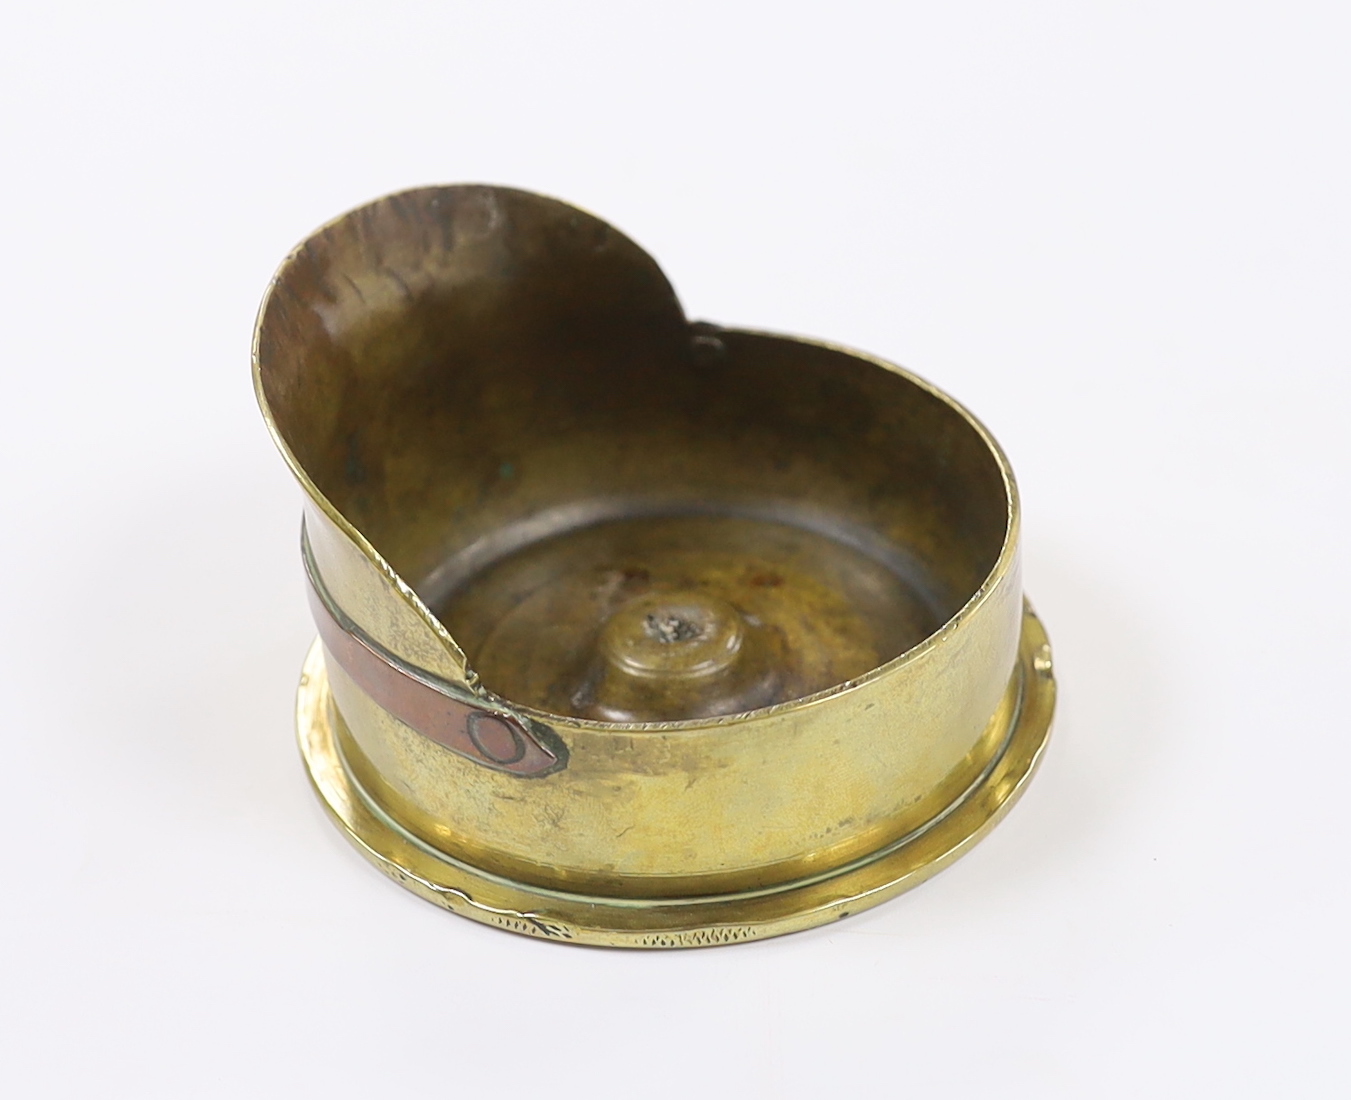 A First World War trench art worked brass cartridge case in the form of a peaked cap